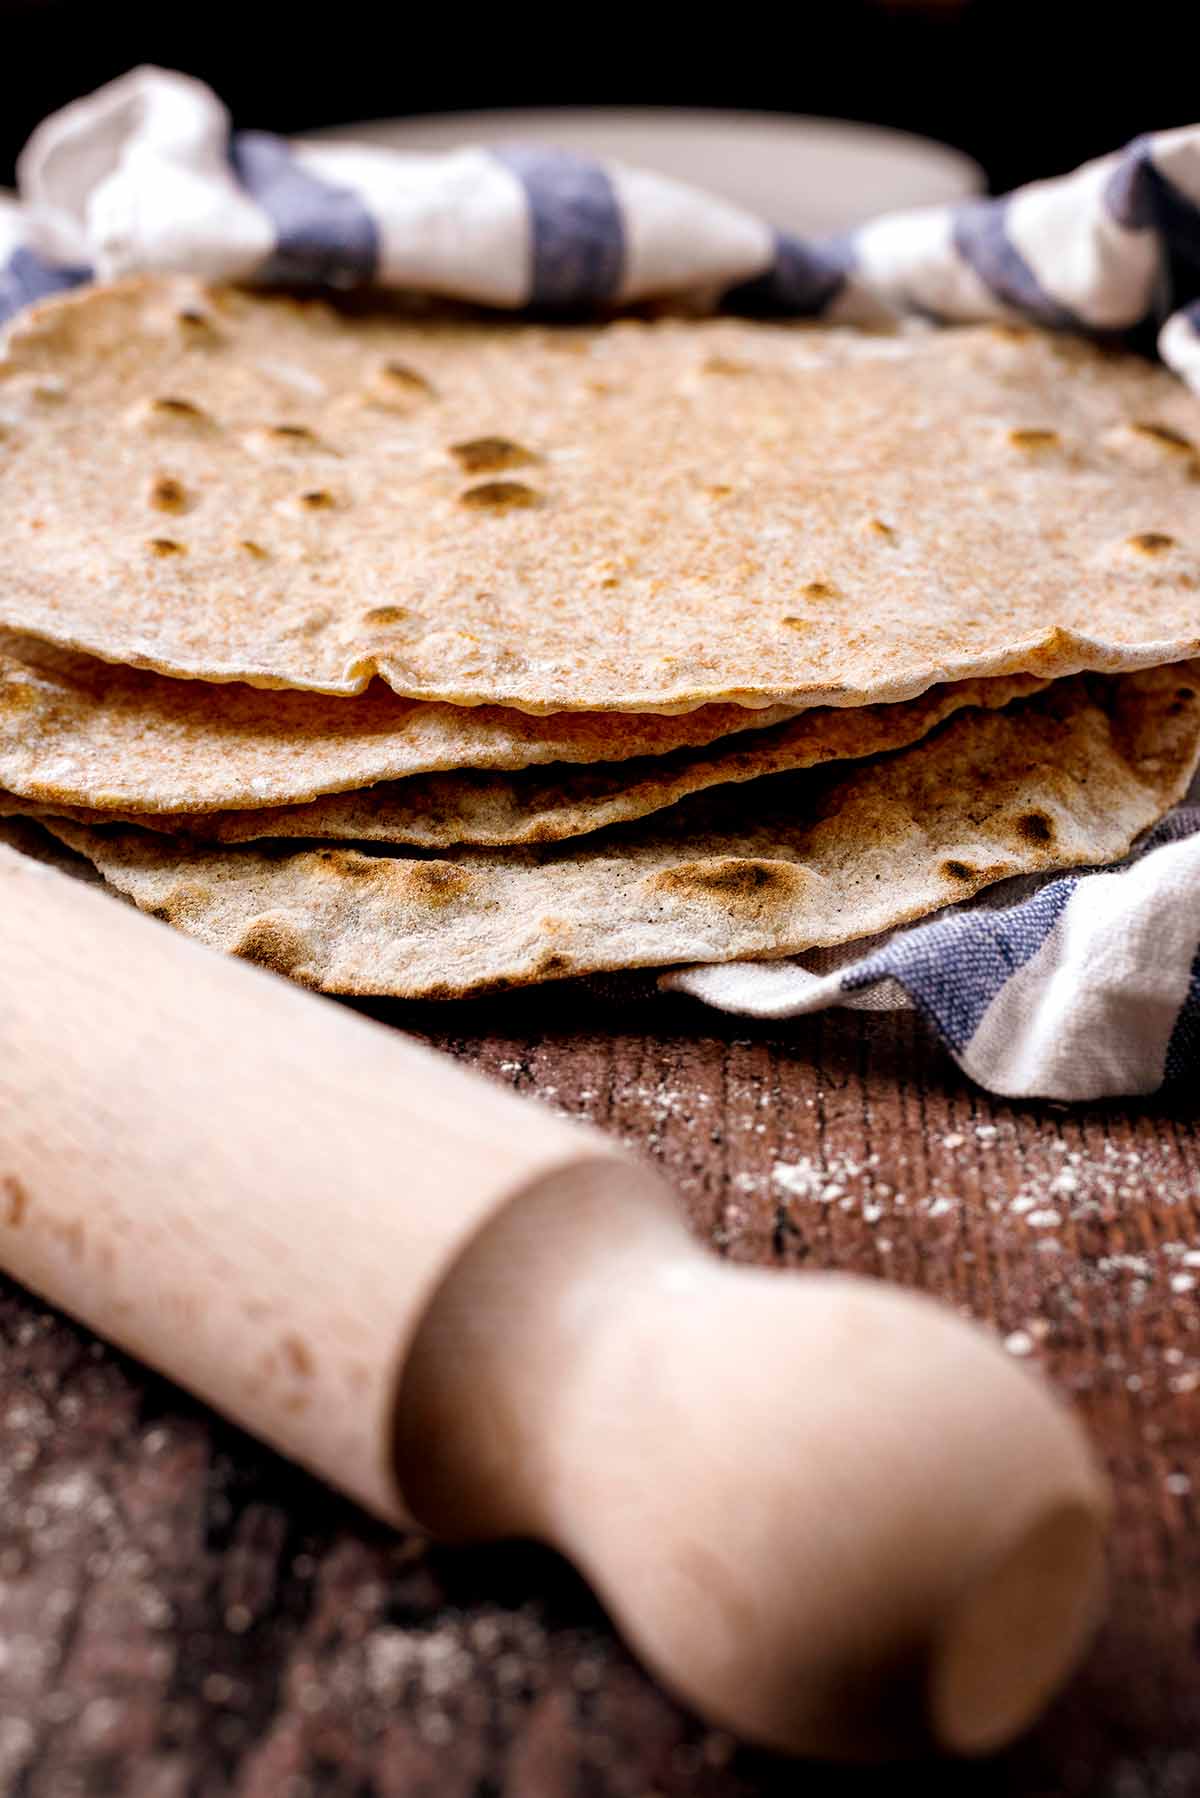 A pile of tortilla wraps with a rolling pin in the foreground.